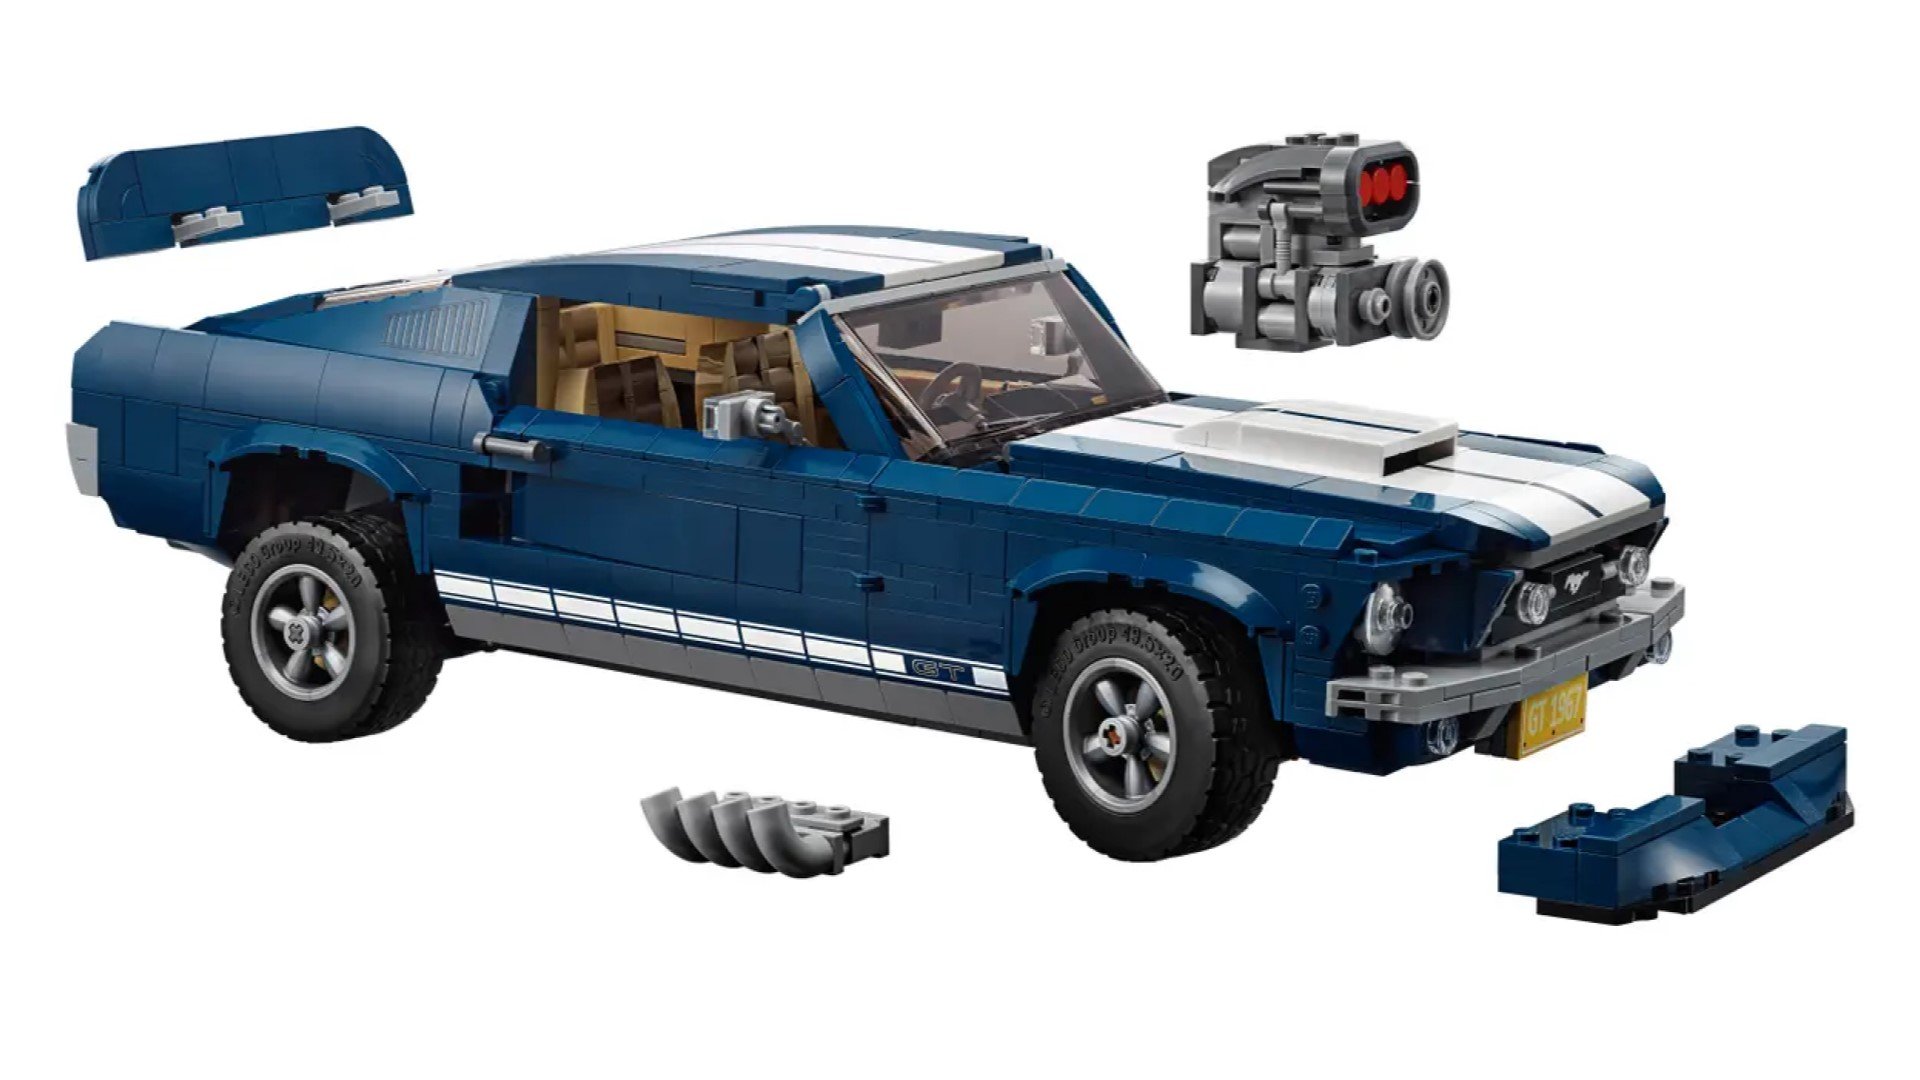 Best Lego sets - A Lego Ford Mustang